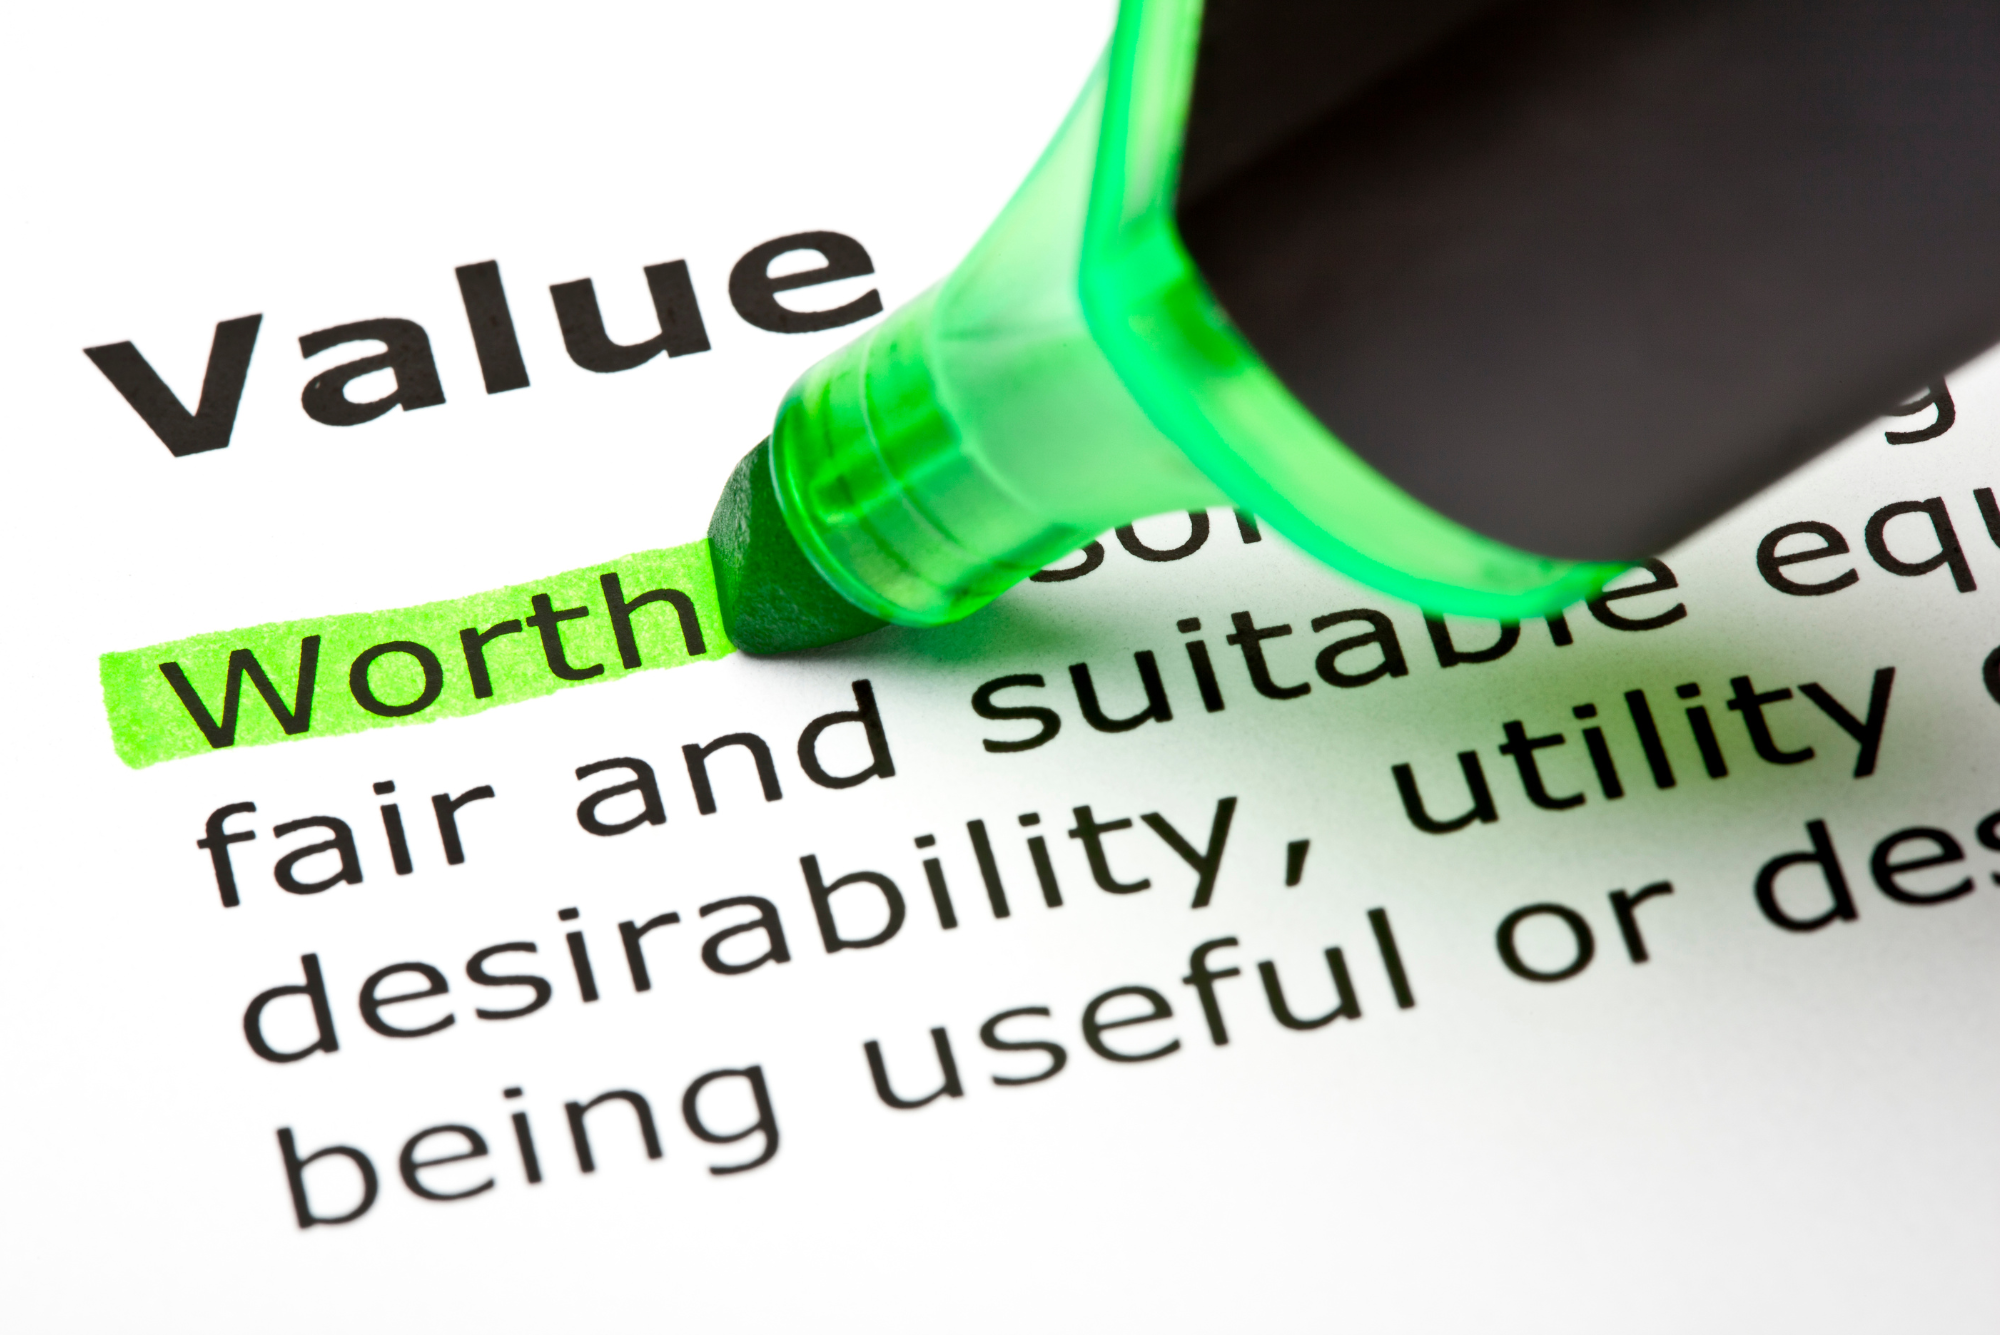 The word value's definition with the word "worth" highlighted in green.